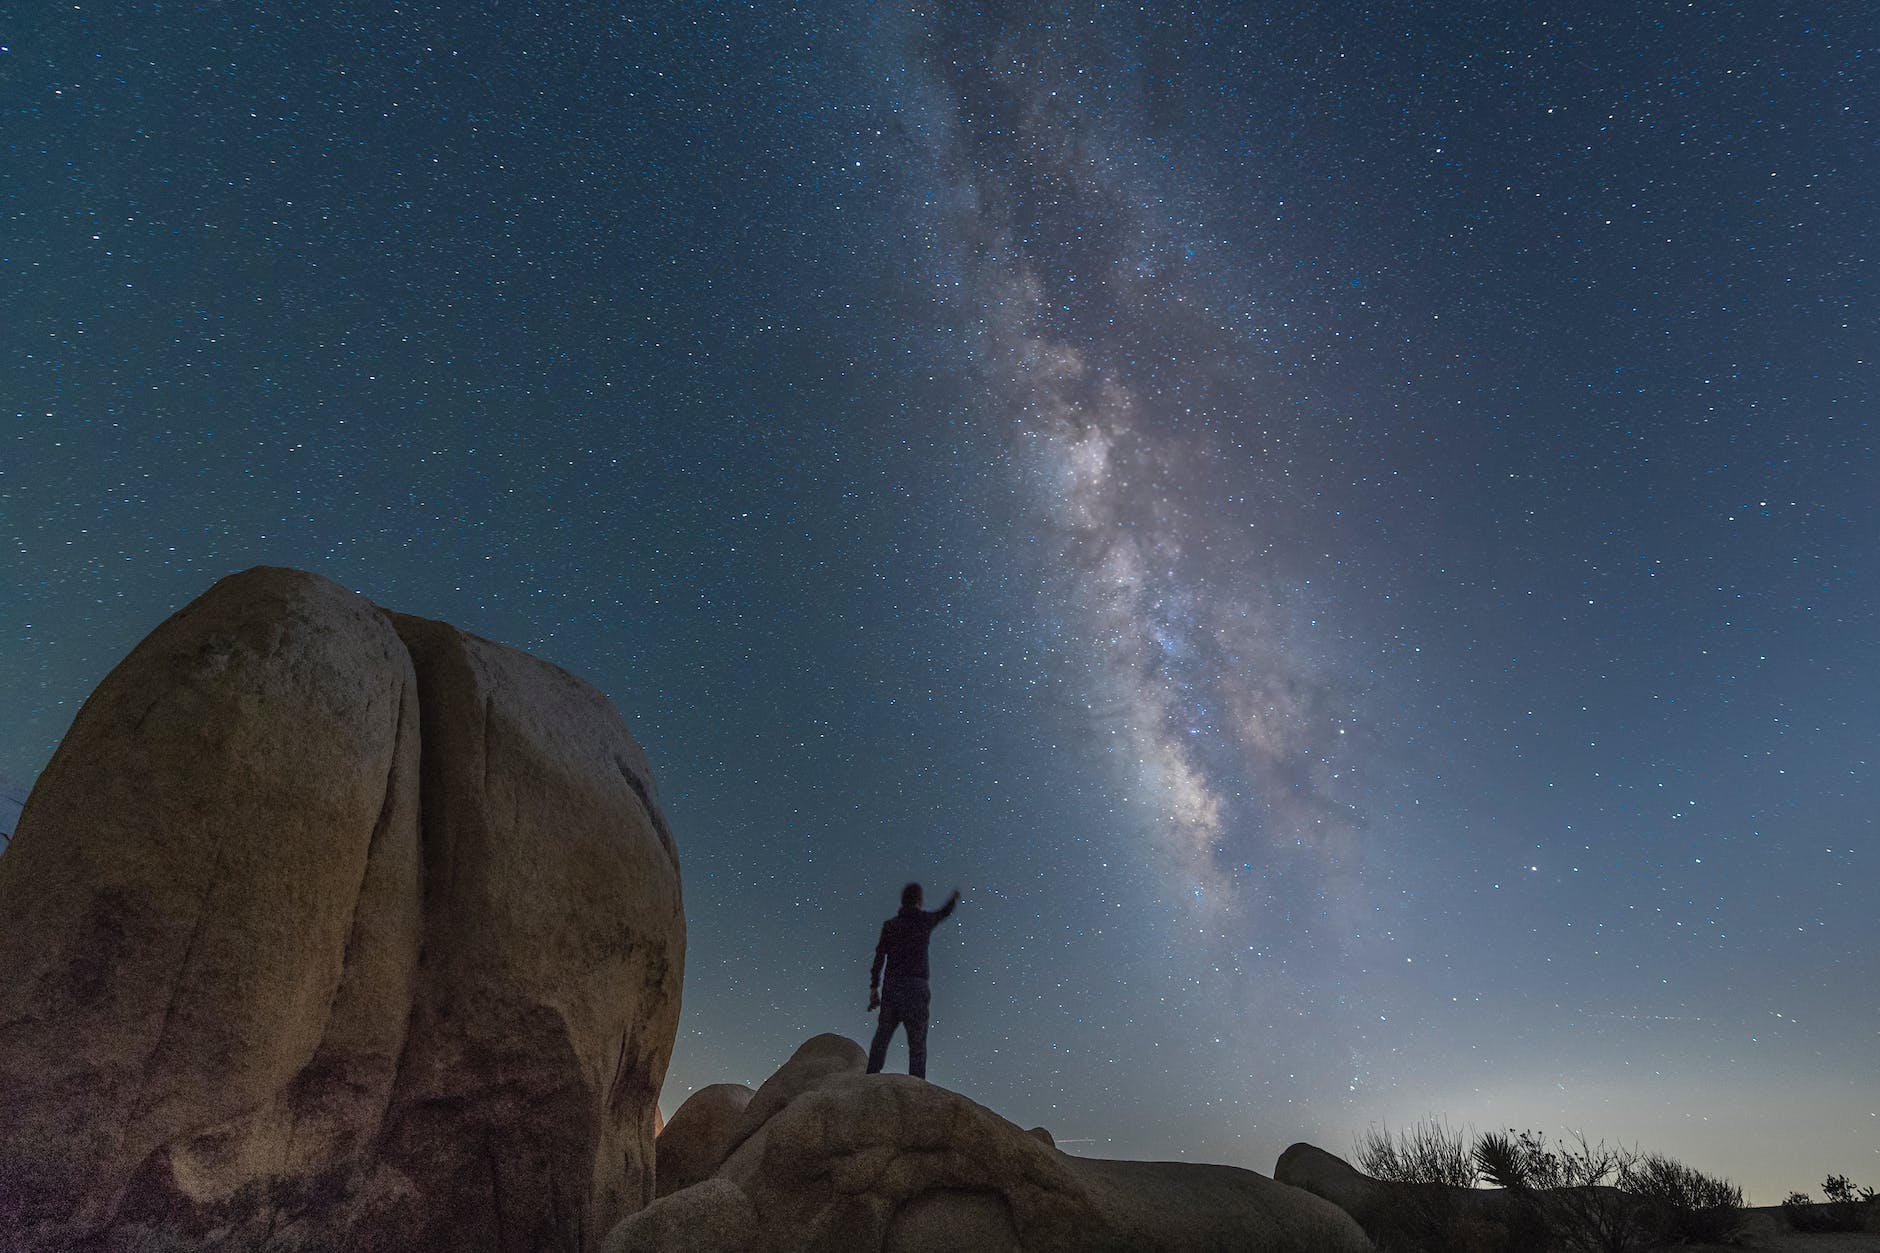 a person standing on a rock under a starry night sky